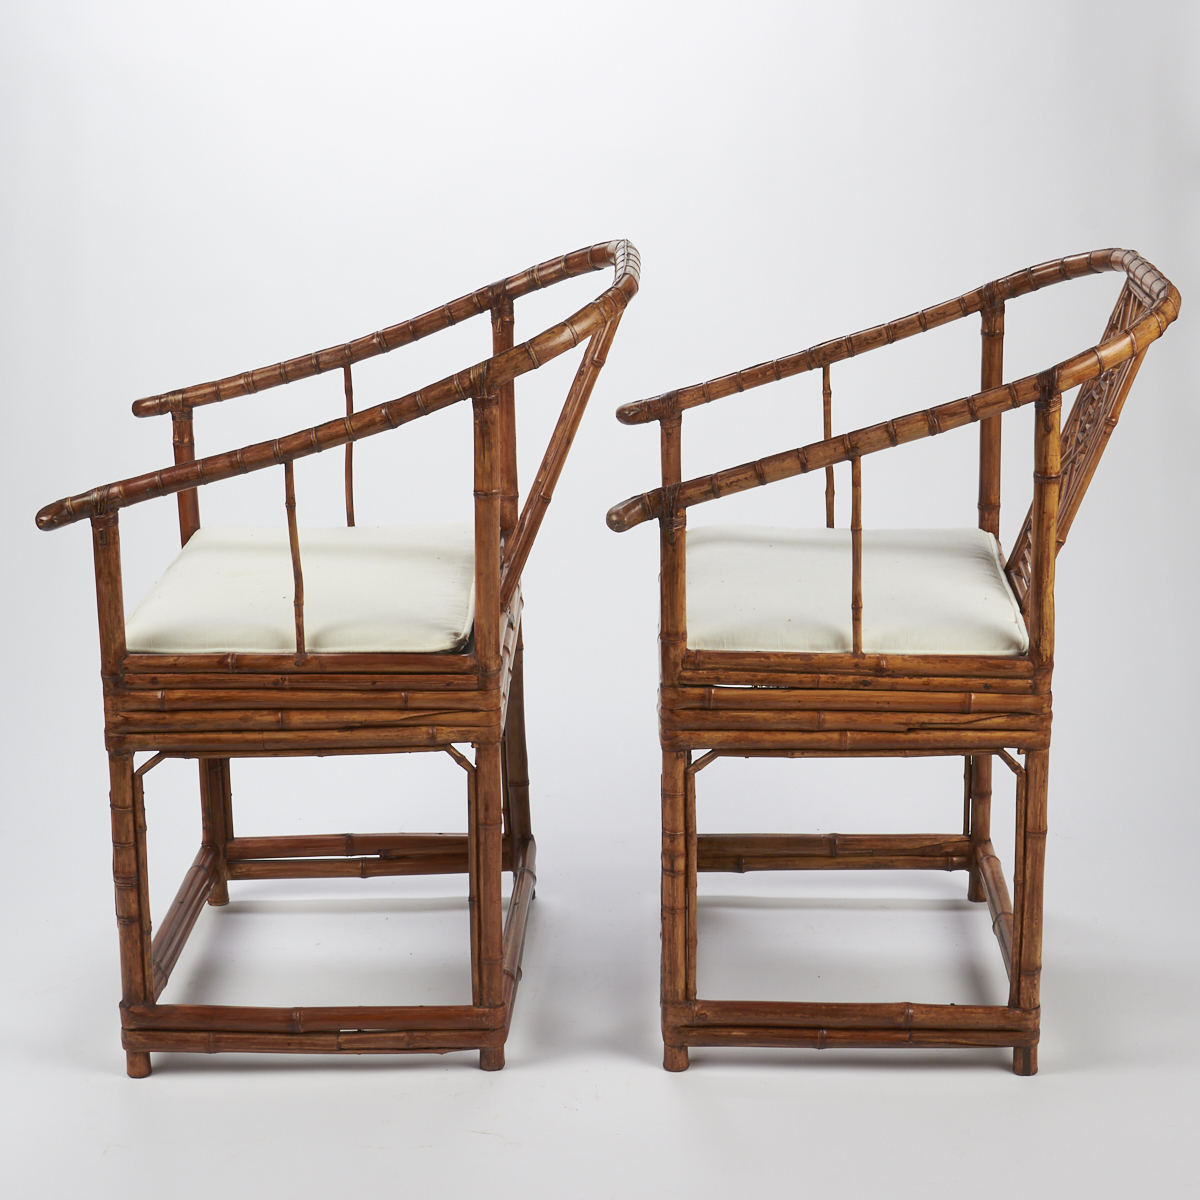 Pair of Chinese Bound Bamboo Chairs - Image 3 of 9